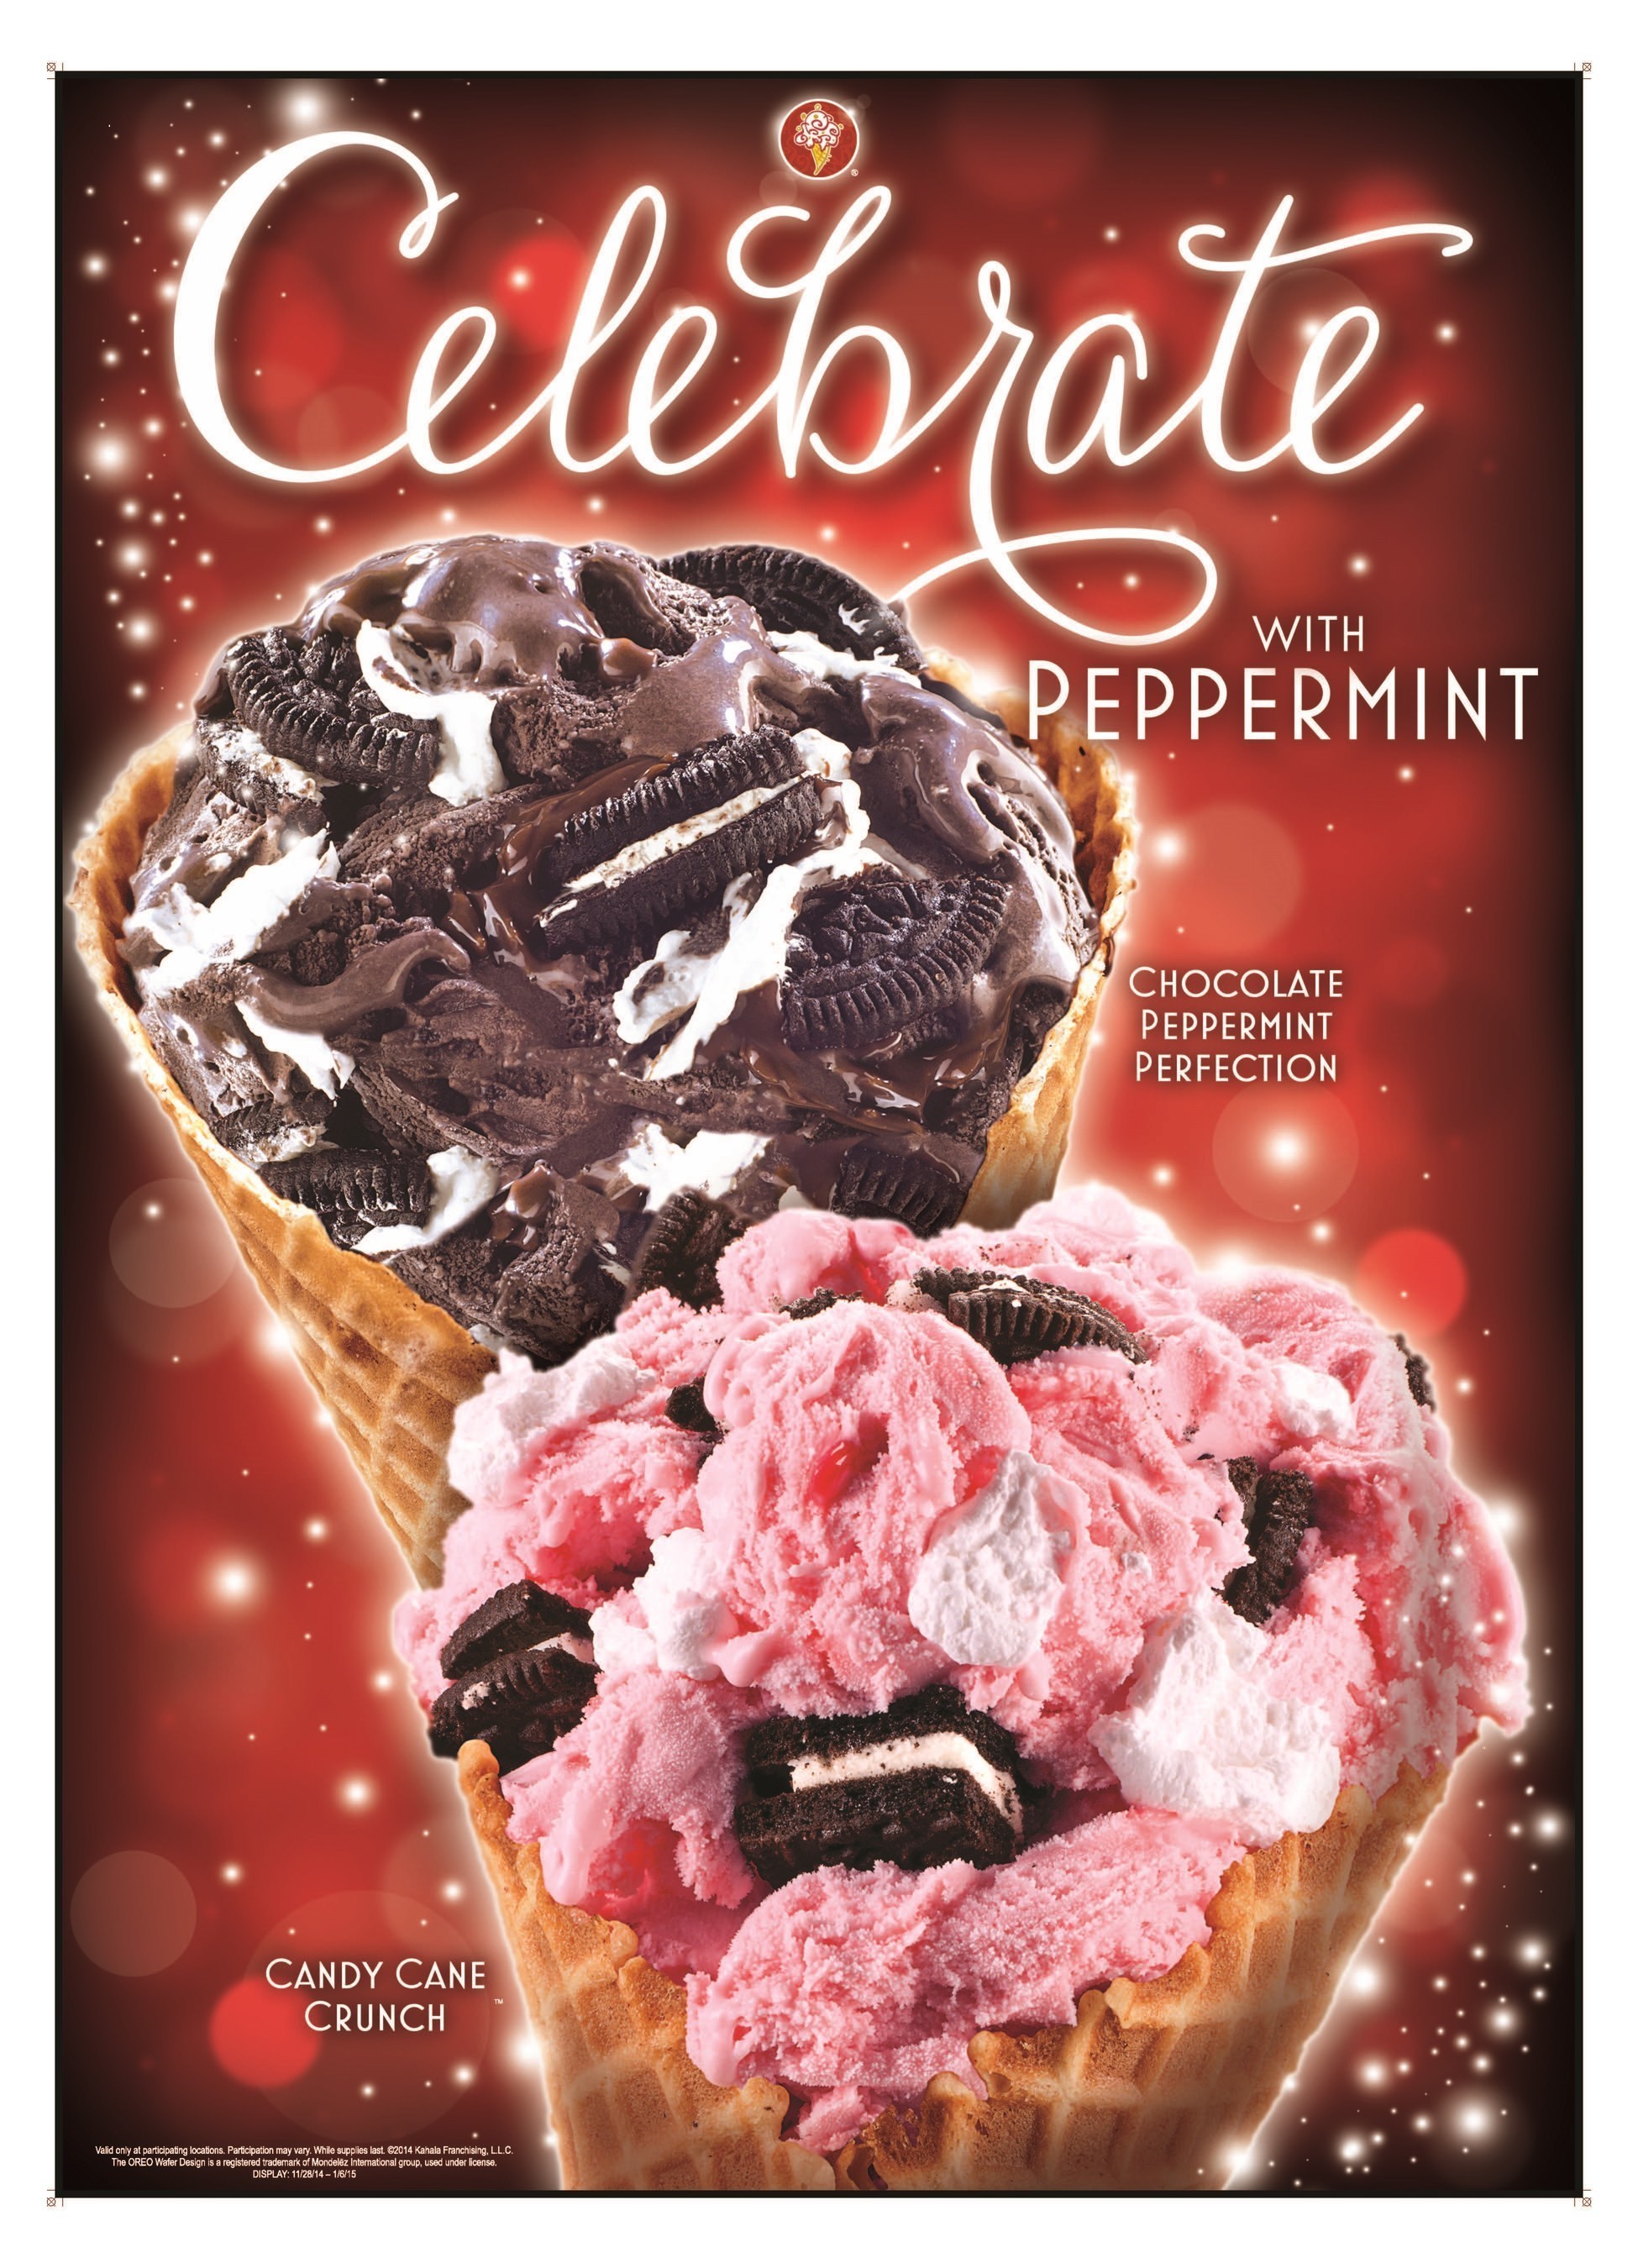 Celebrate the Holidays with a Cold Stone Creamery Creation